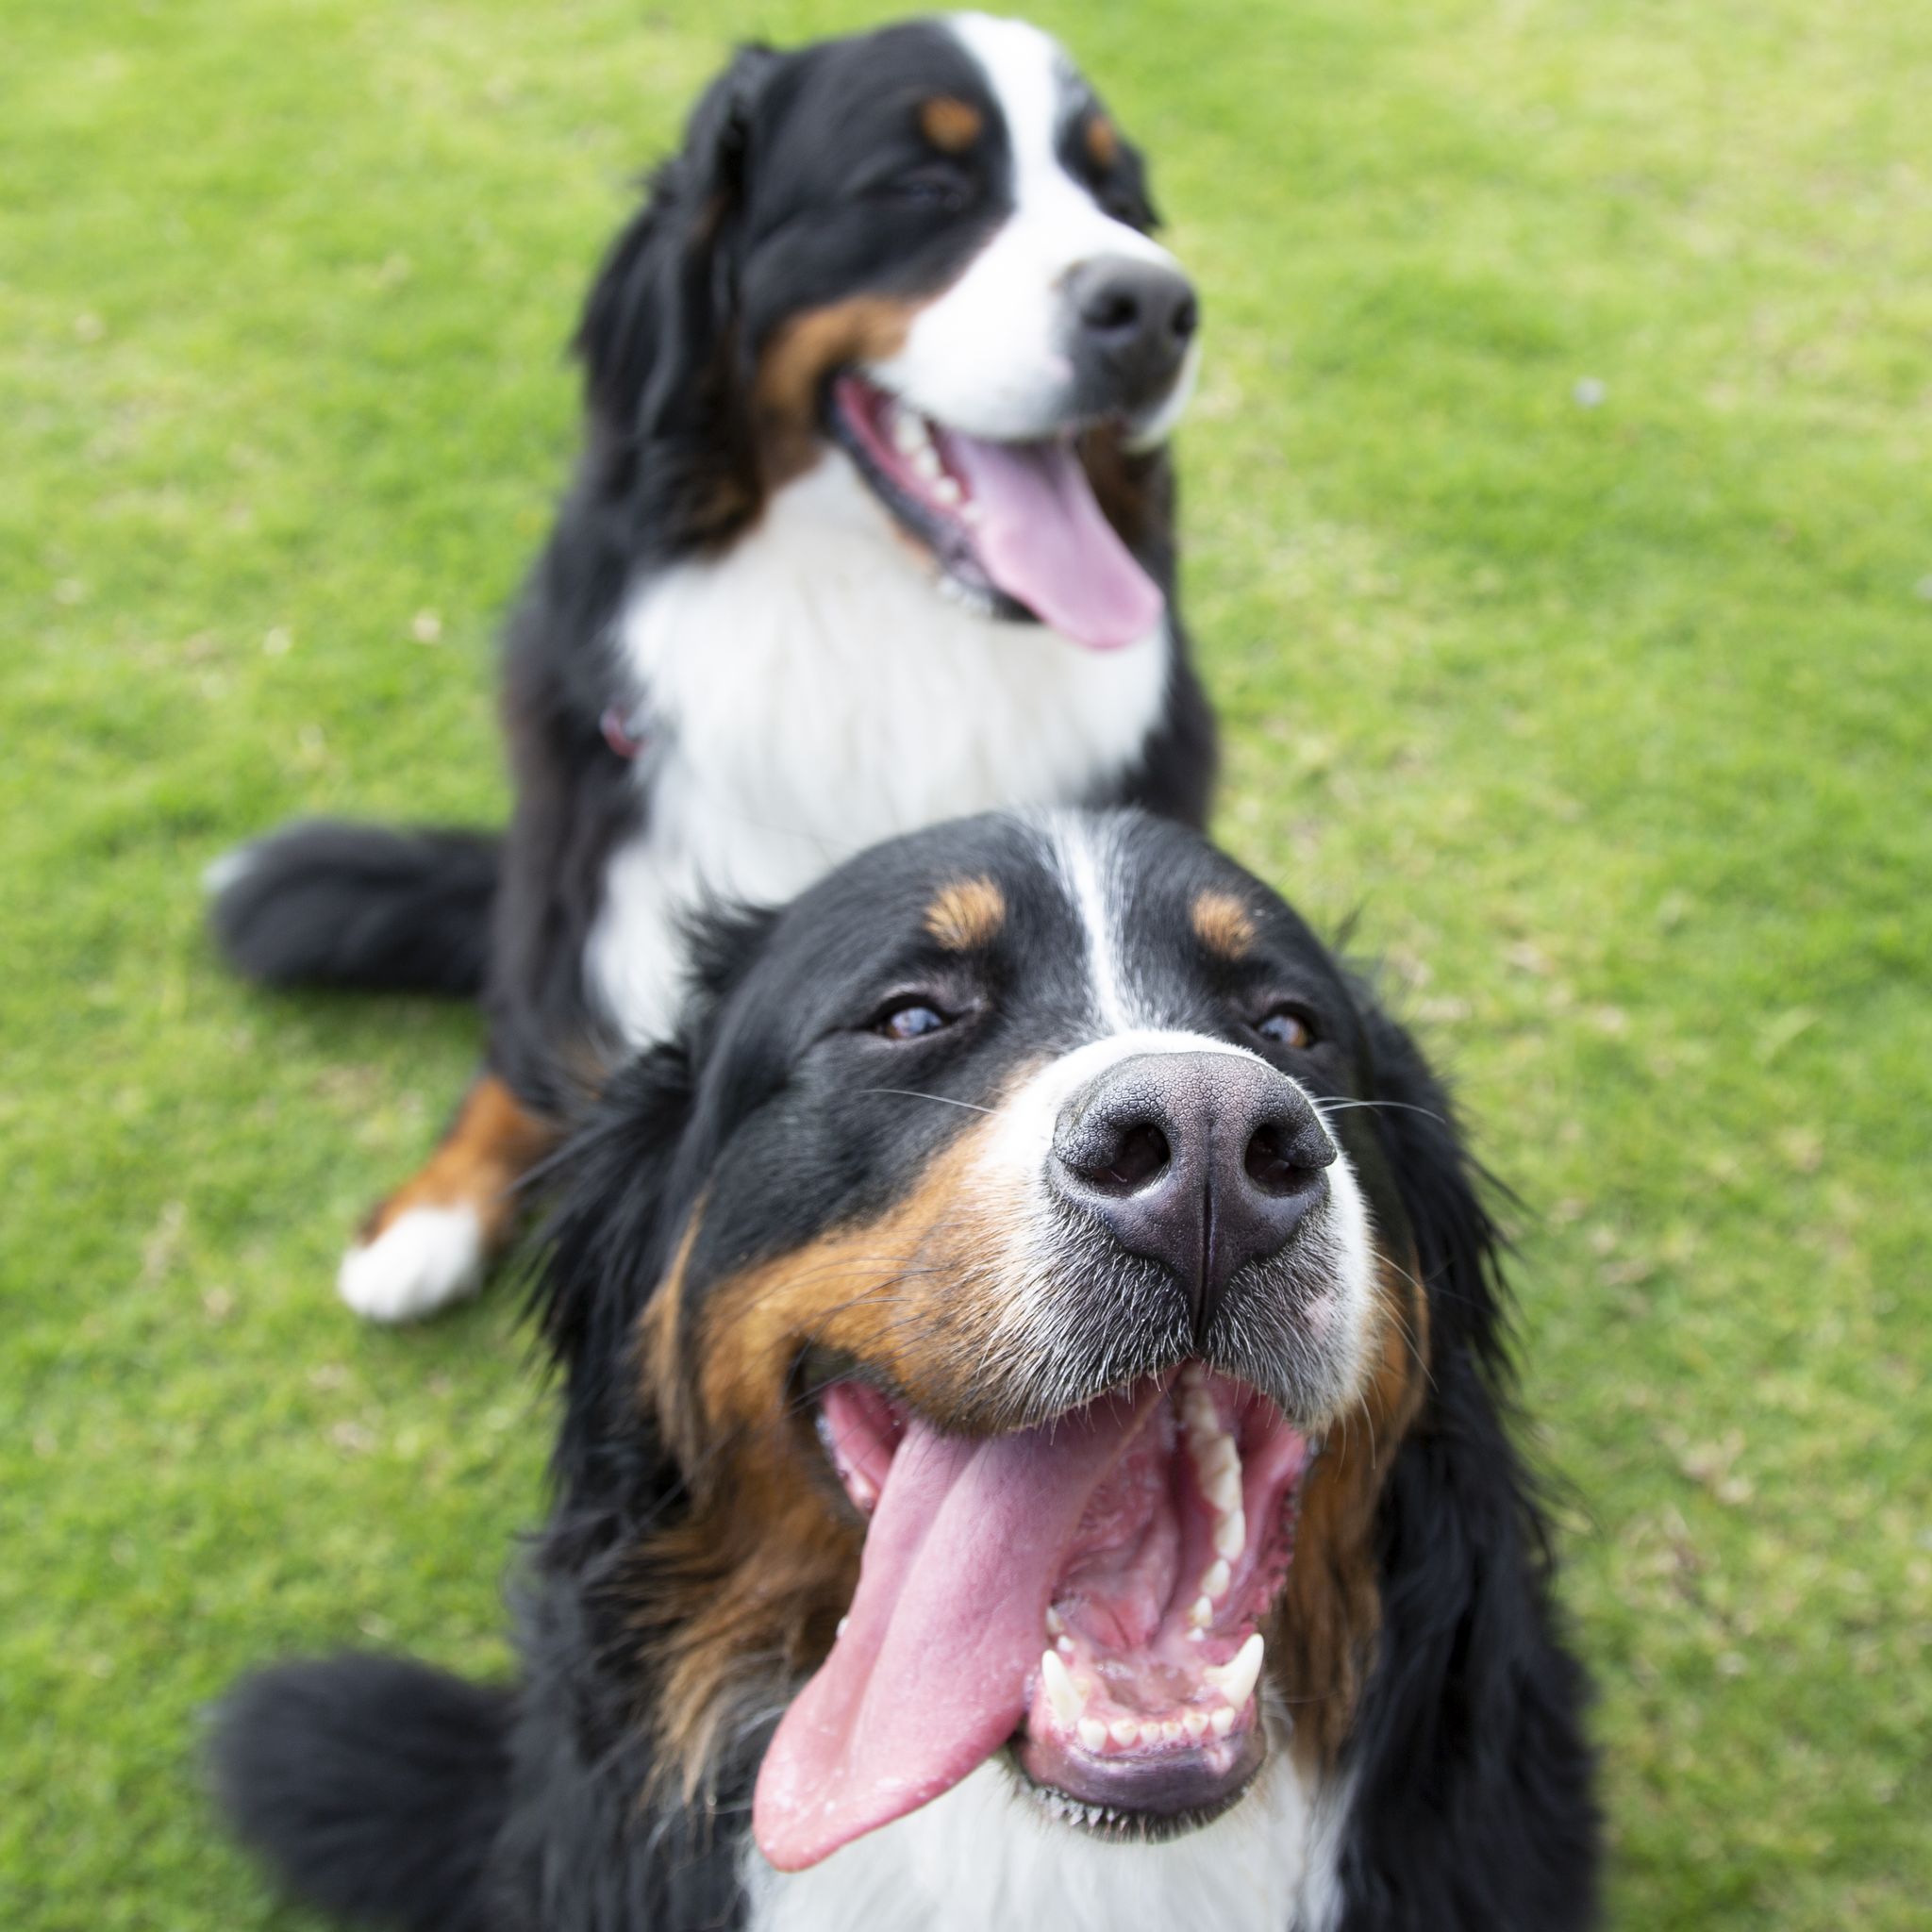 16 words dogs love the most, according to a new study